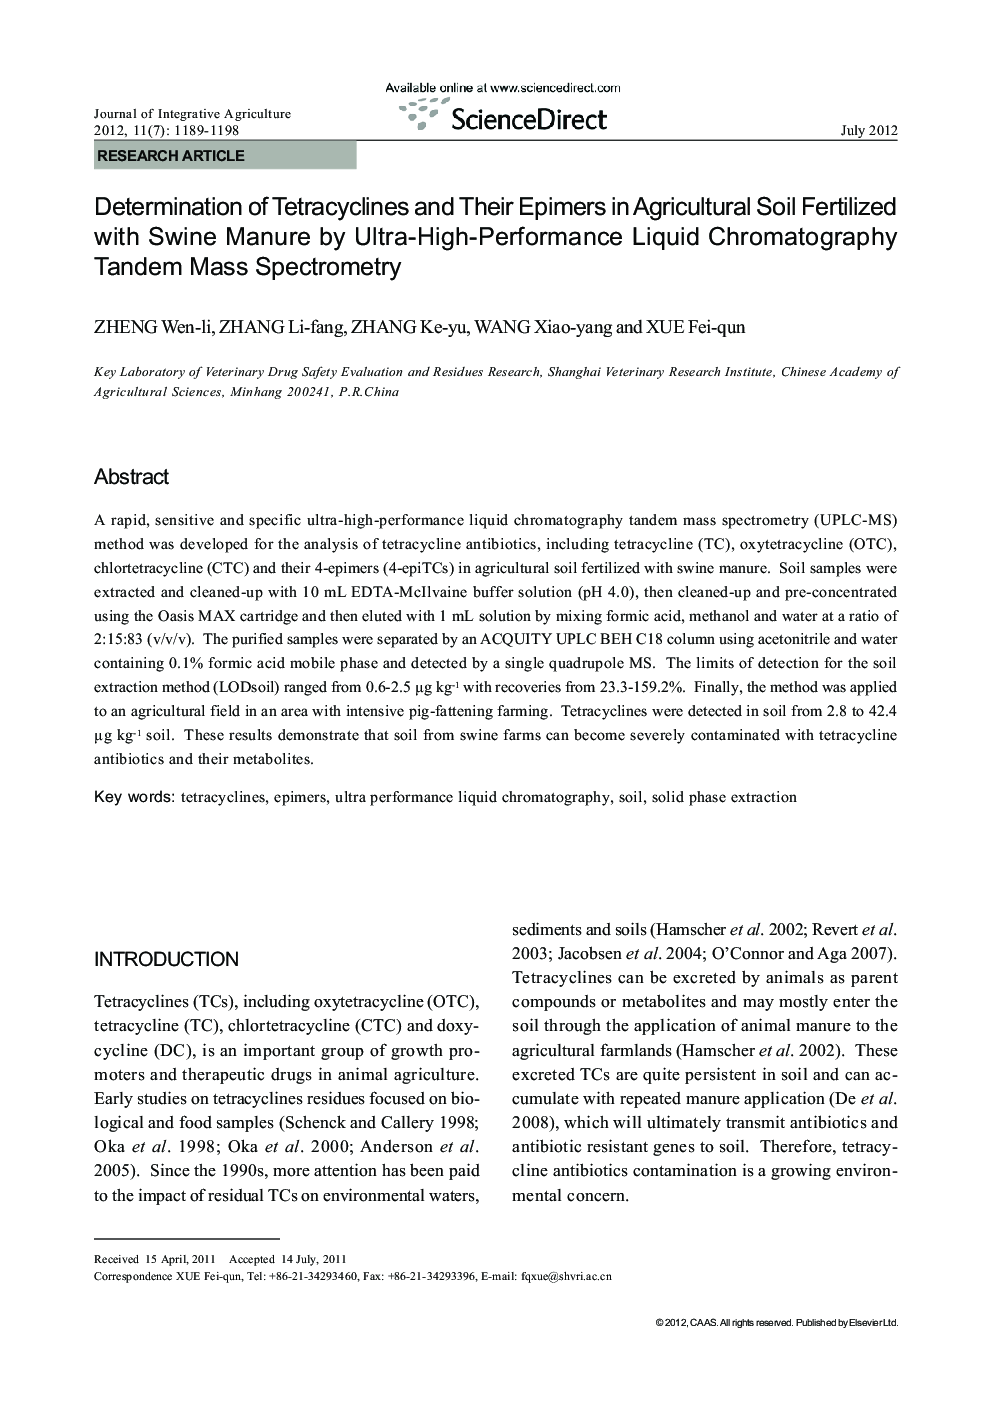 Determination of Tetracyclines and Their Epimers in Agricultural Soil Fertilized with Swine Manure by Ultra-High-Performance Liquid Chromatography Tandem Mass Spectrometry